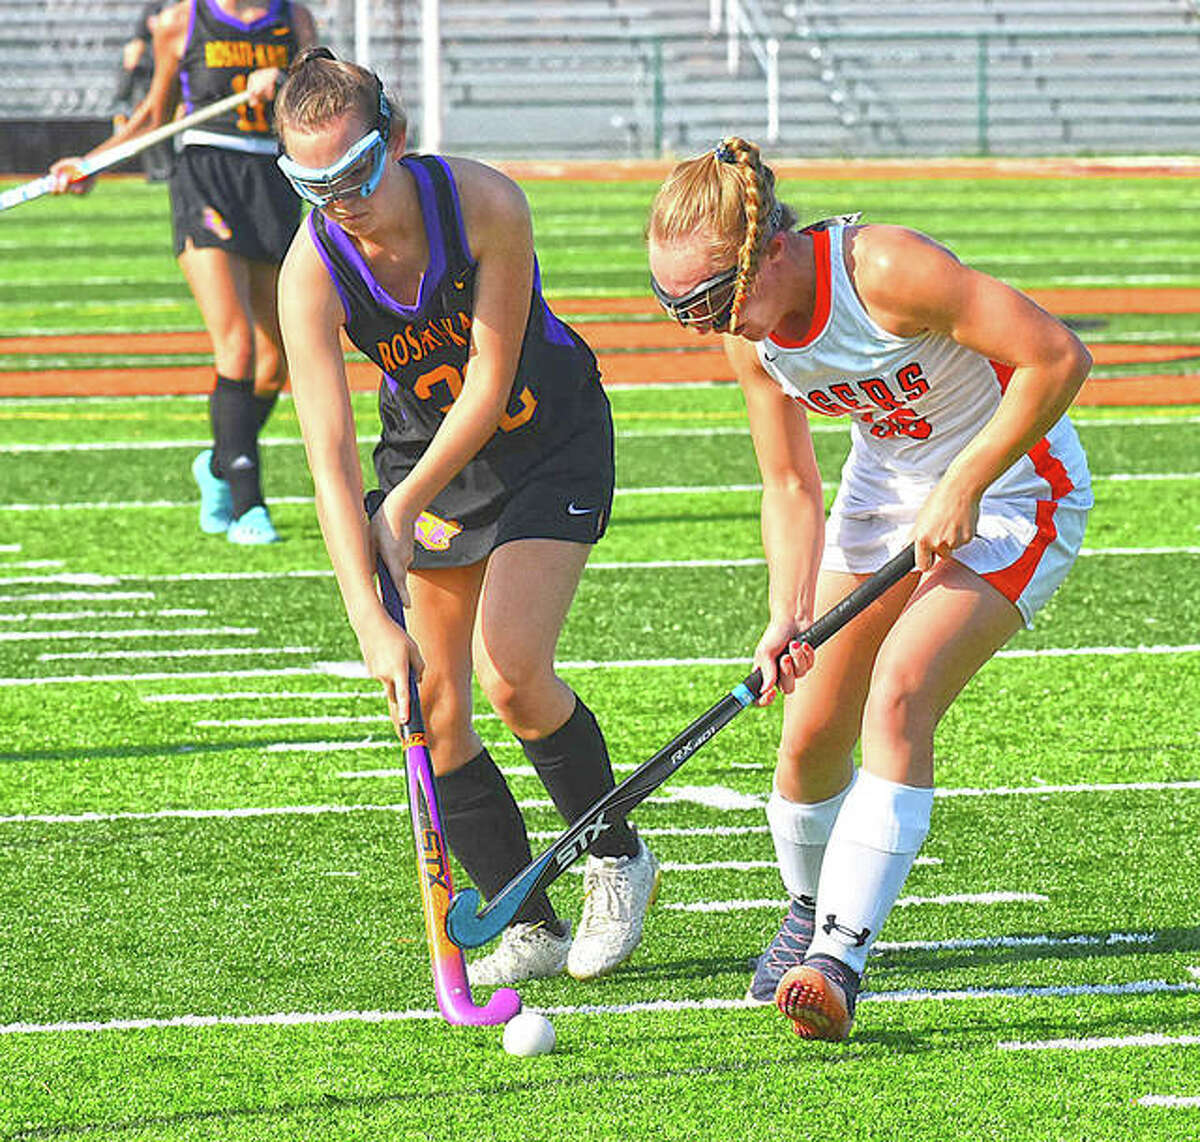 Edwardsville forward Mattie Norton battles through a defender to keep possession of the ball in the first half Wednesday.